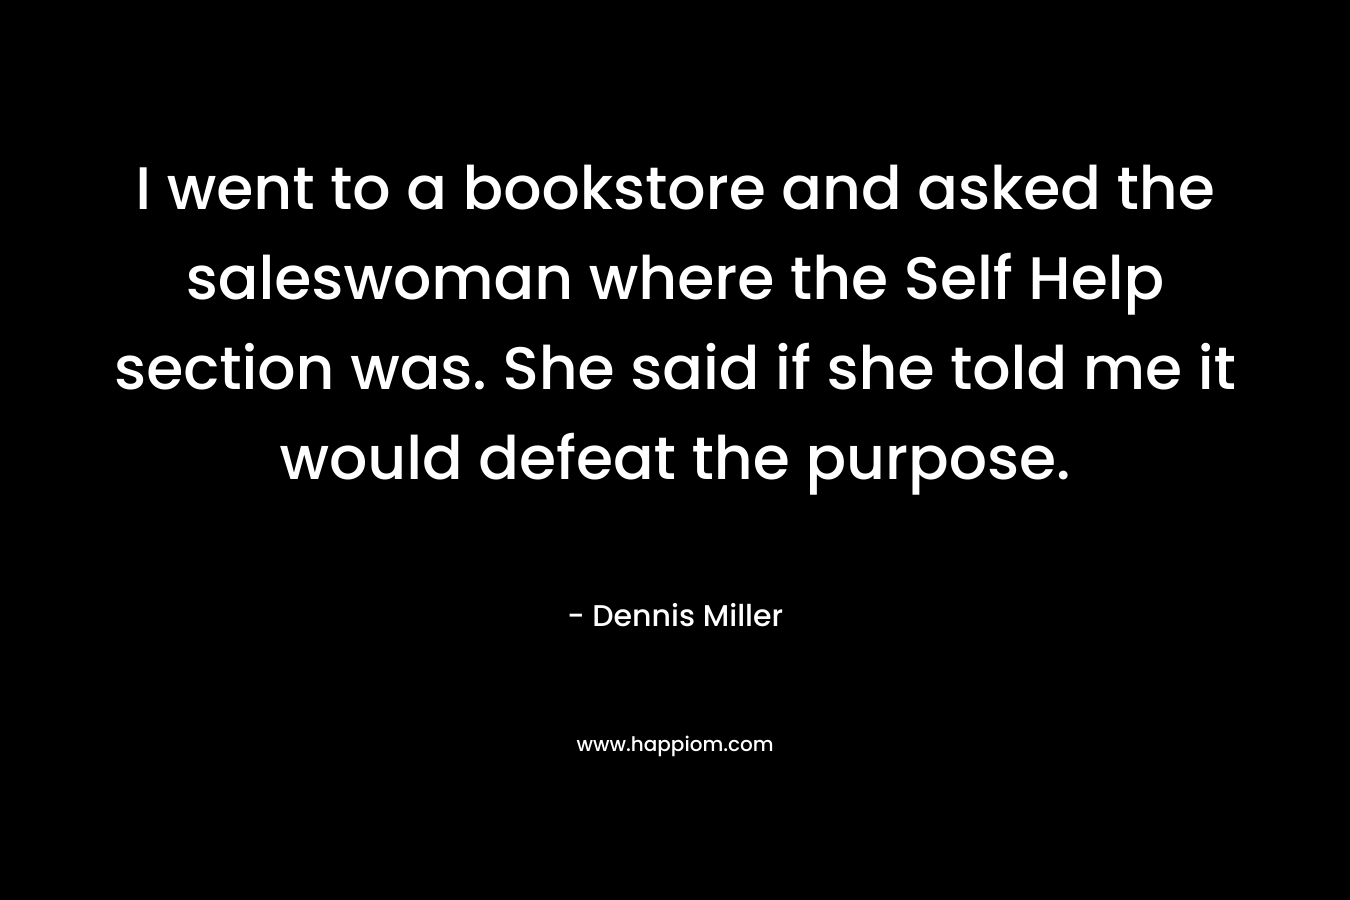 I went to a bookstore and asked the saleswoman where the Self Help section was. She said if she told me it would defeat the purpose.